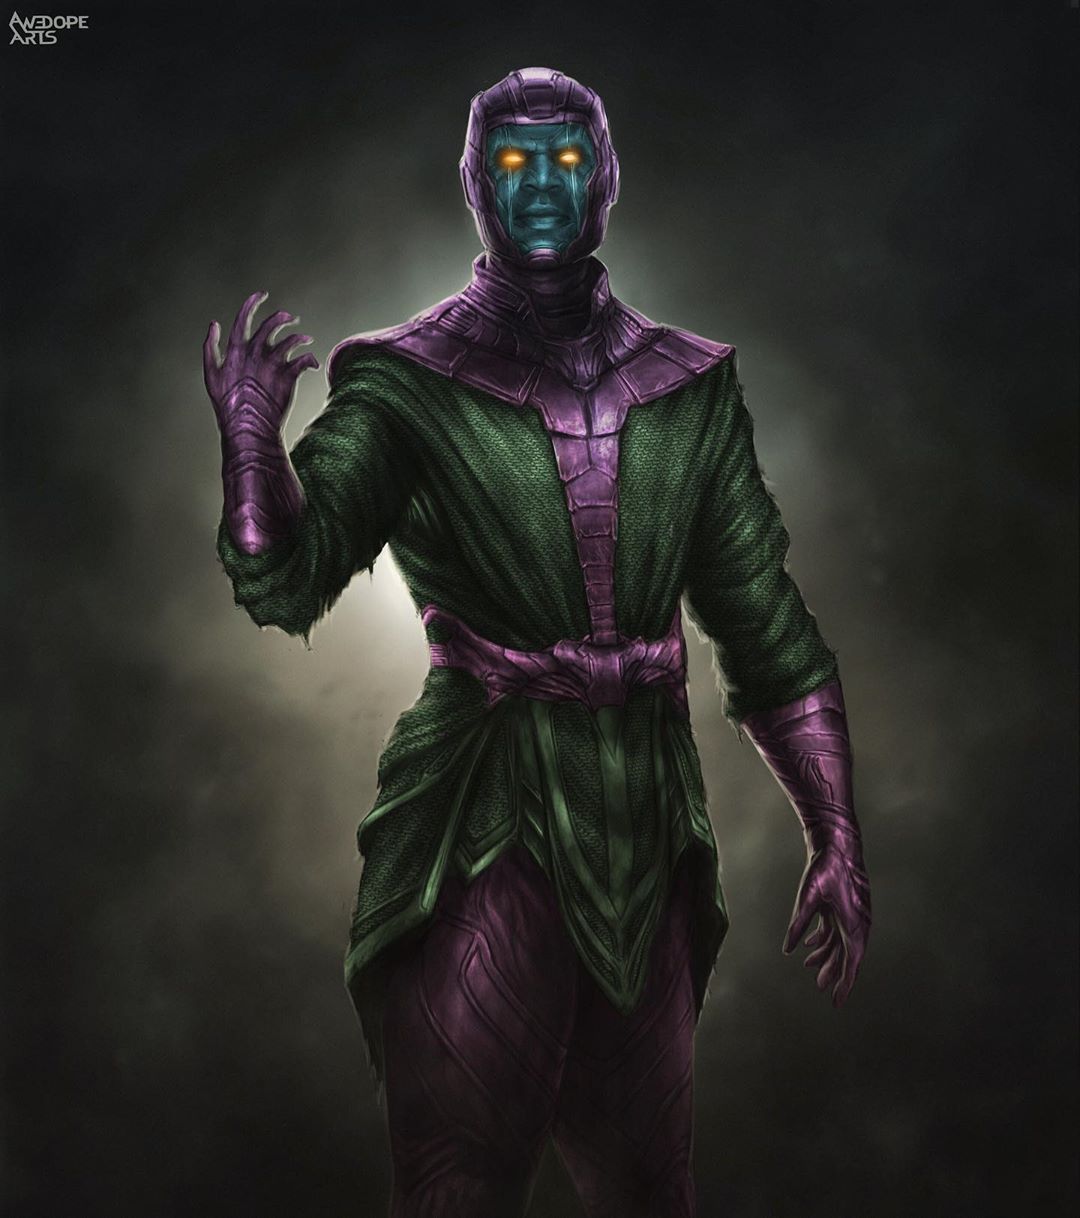 AwedopeArts on Instagram: “Kang the conqeror.. finally were going to see kang in Antman 3 and this is my. Marvel concept art, Marvel comic universe, Marvel